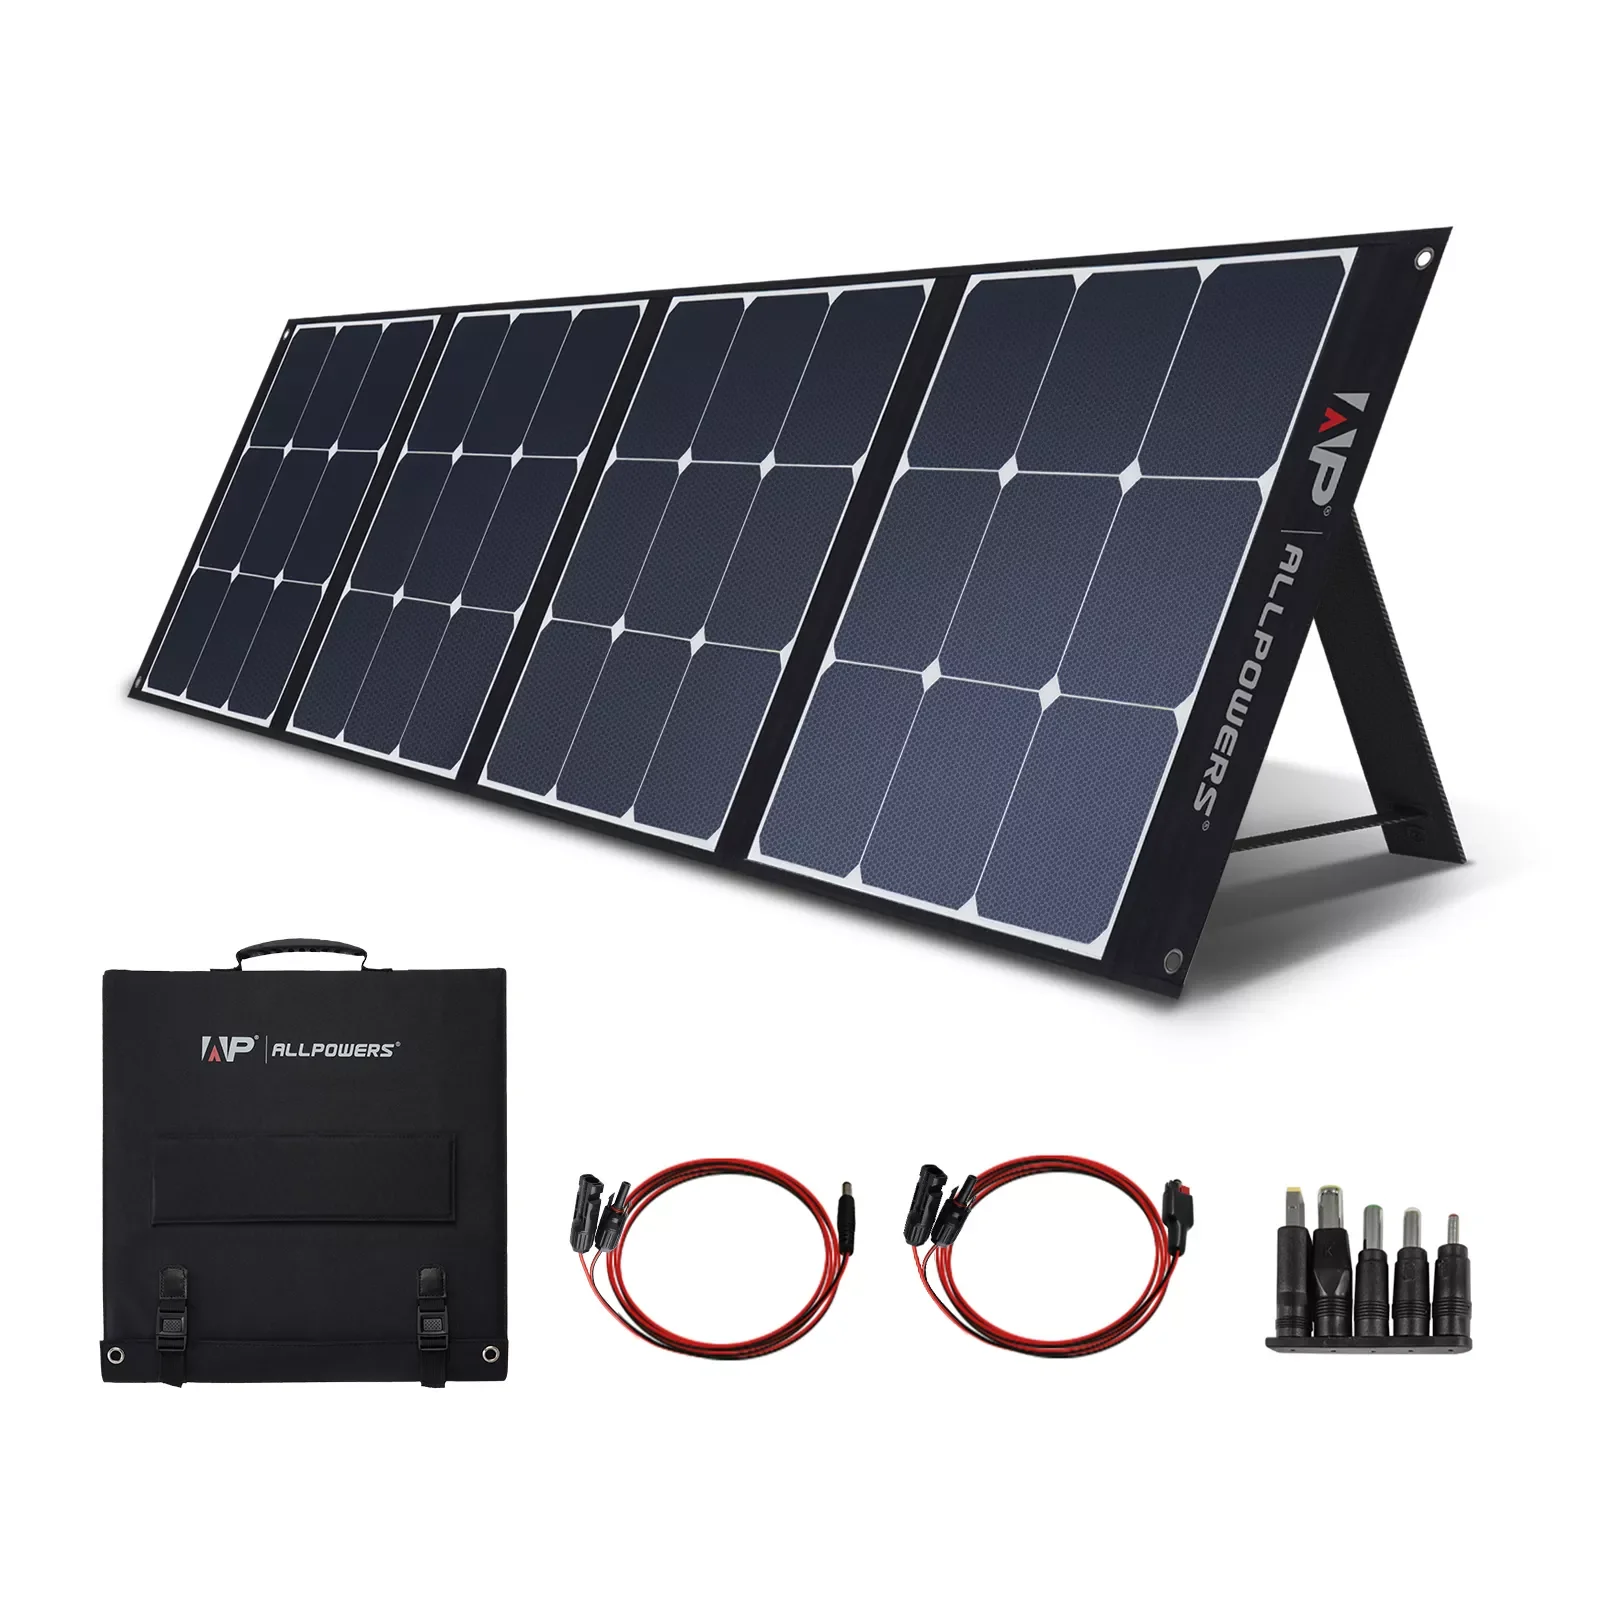 

NEW ALLPOWERS Flexible Foldable Solar Panel 120W / 200W High Efficience Solar Panel Kit Solar battery Charger For Camping, Boat